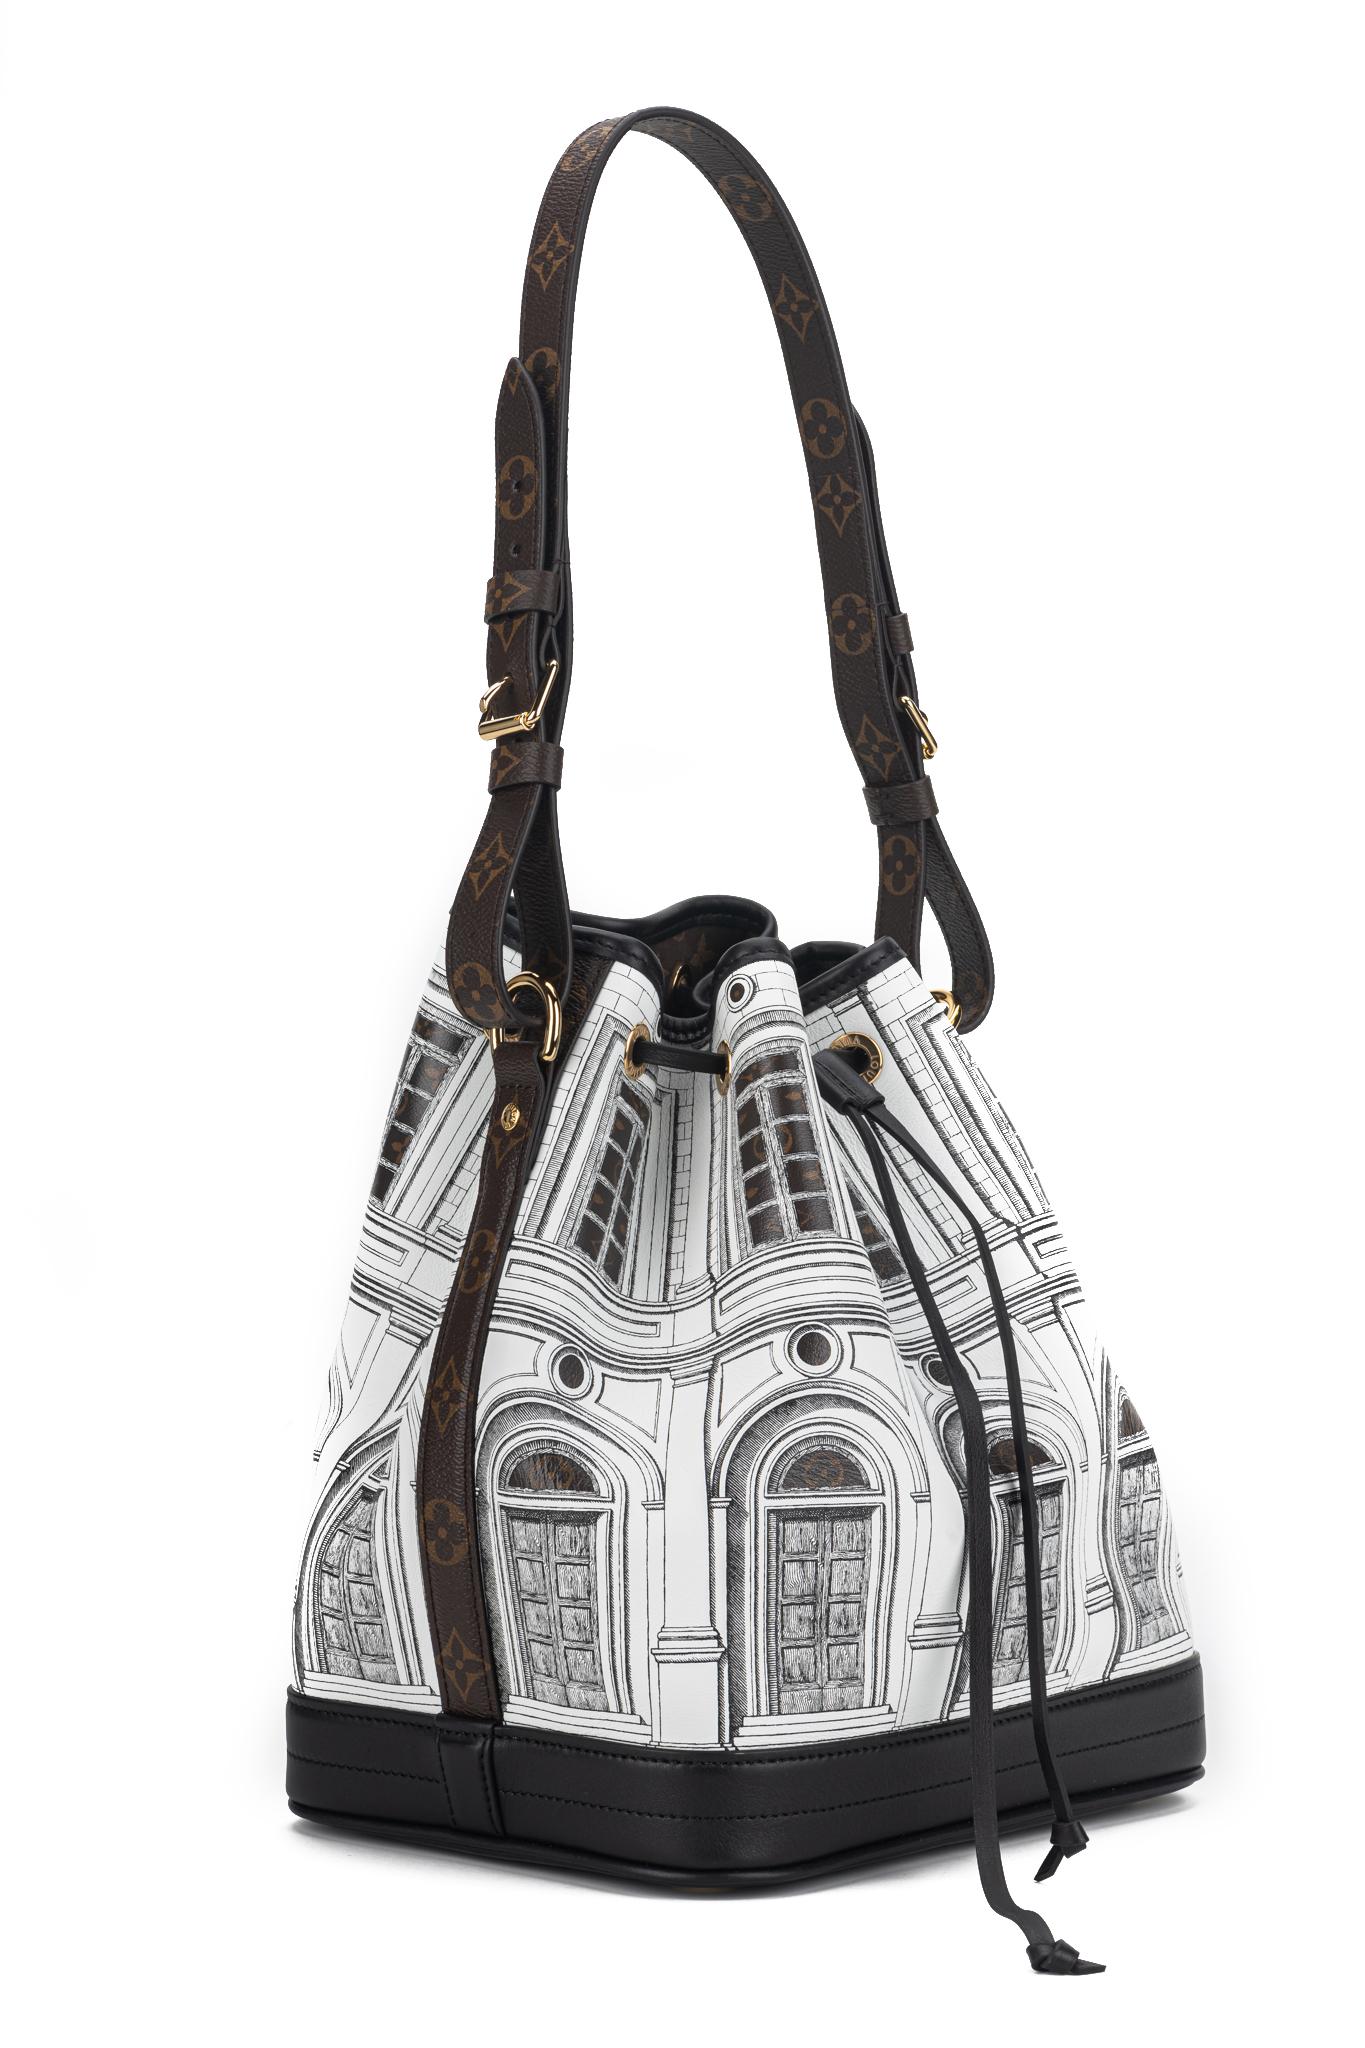 Louis Vuitton x Fornasetti Bucket Bag NIB In New Condition For Sale In West Hollywood, CA